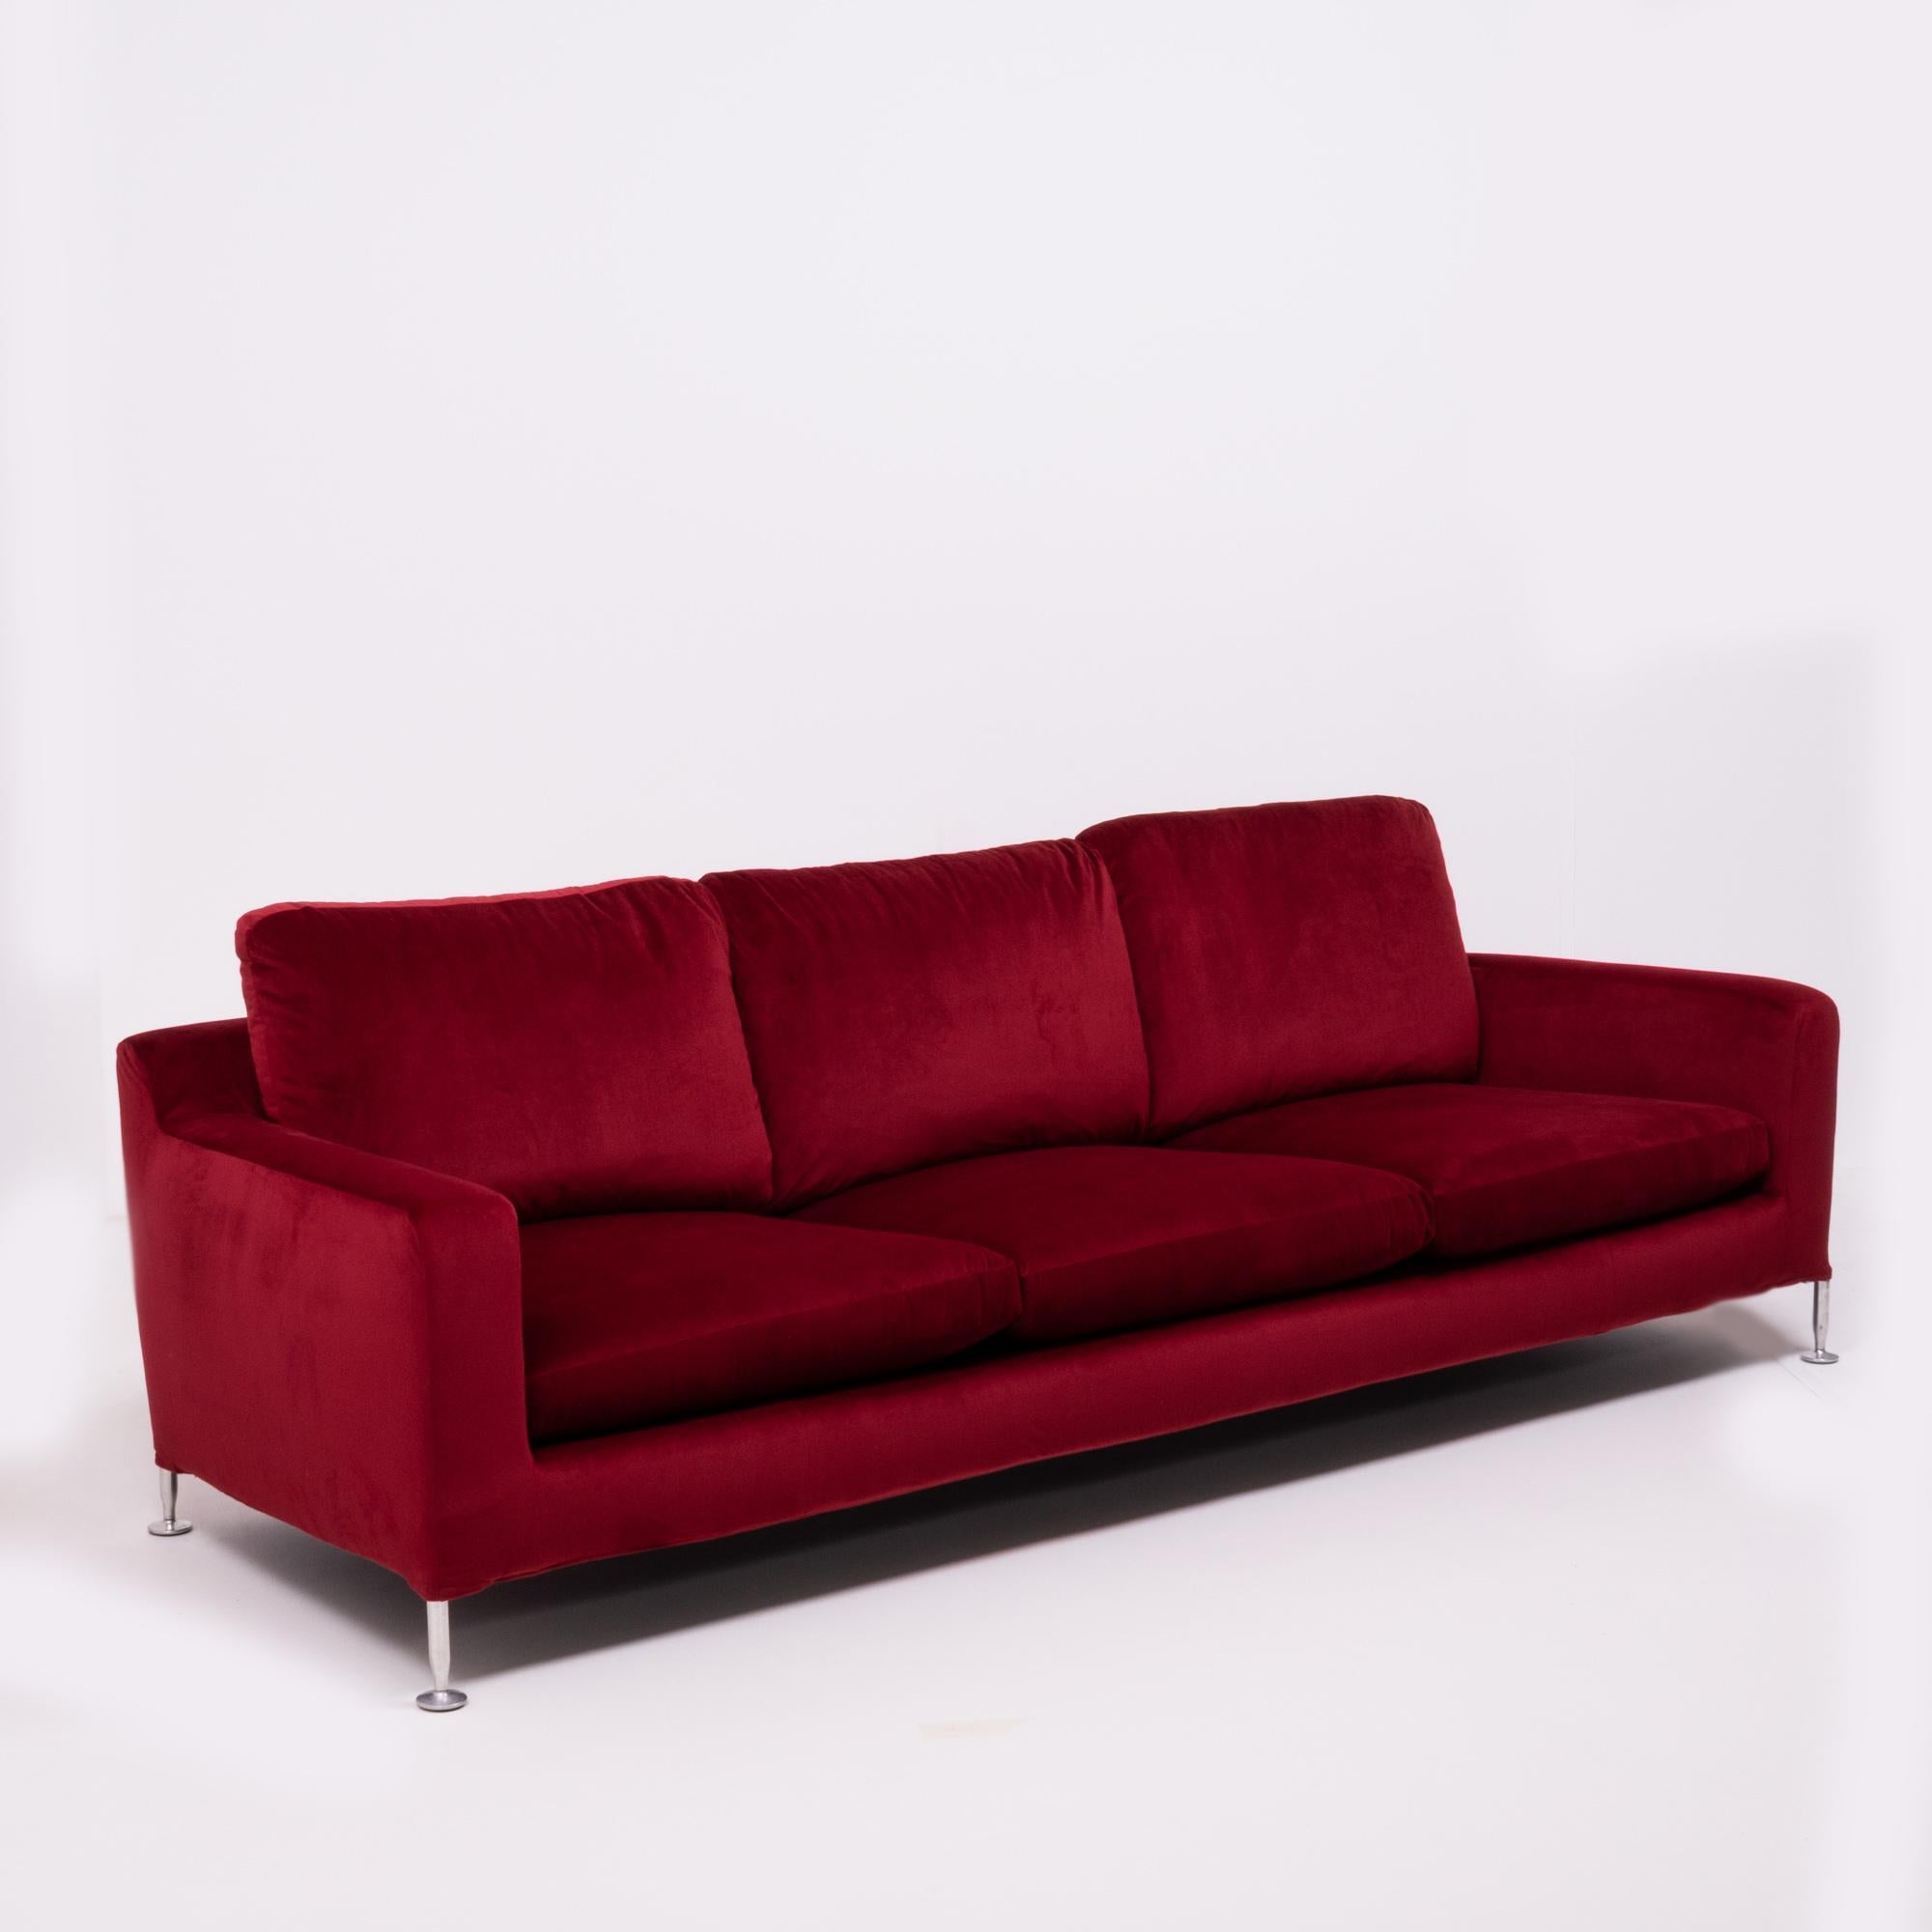 Originally designed in 1995 by Antonio Citterio for B&B Italia, the Harry sofa is named after the famous artist and furniture designer Harry Bertoia. 

Newly and fully reupholstered in sumptuous crimson red velvet fabric, the three-seat sofa